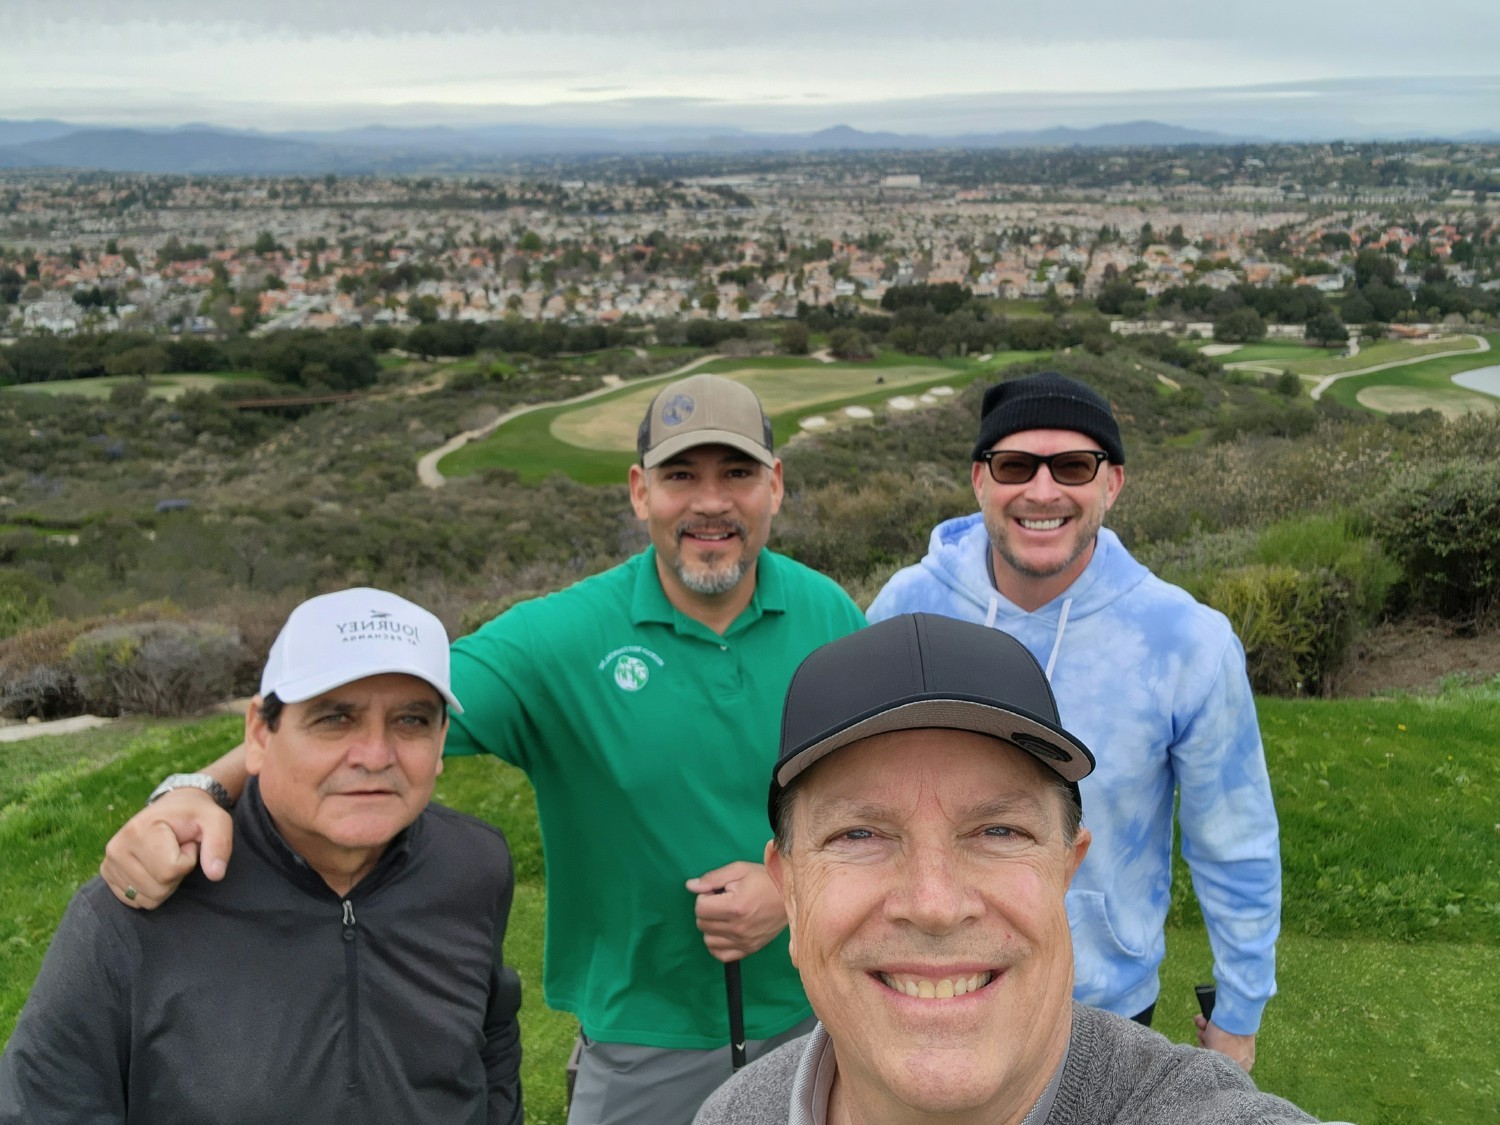 From boardrooms to birdies, our team at Mountain West knows how to score big in both mortgage and on the golf green!